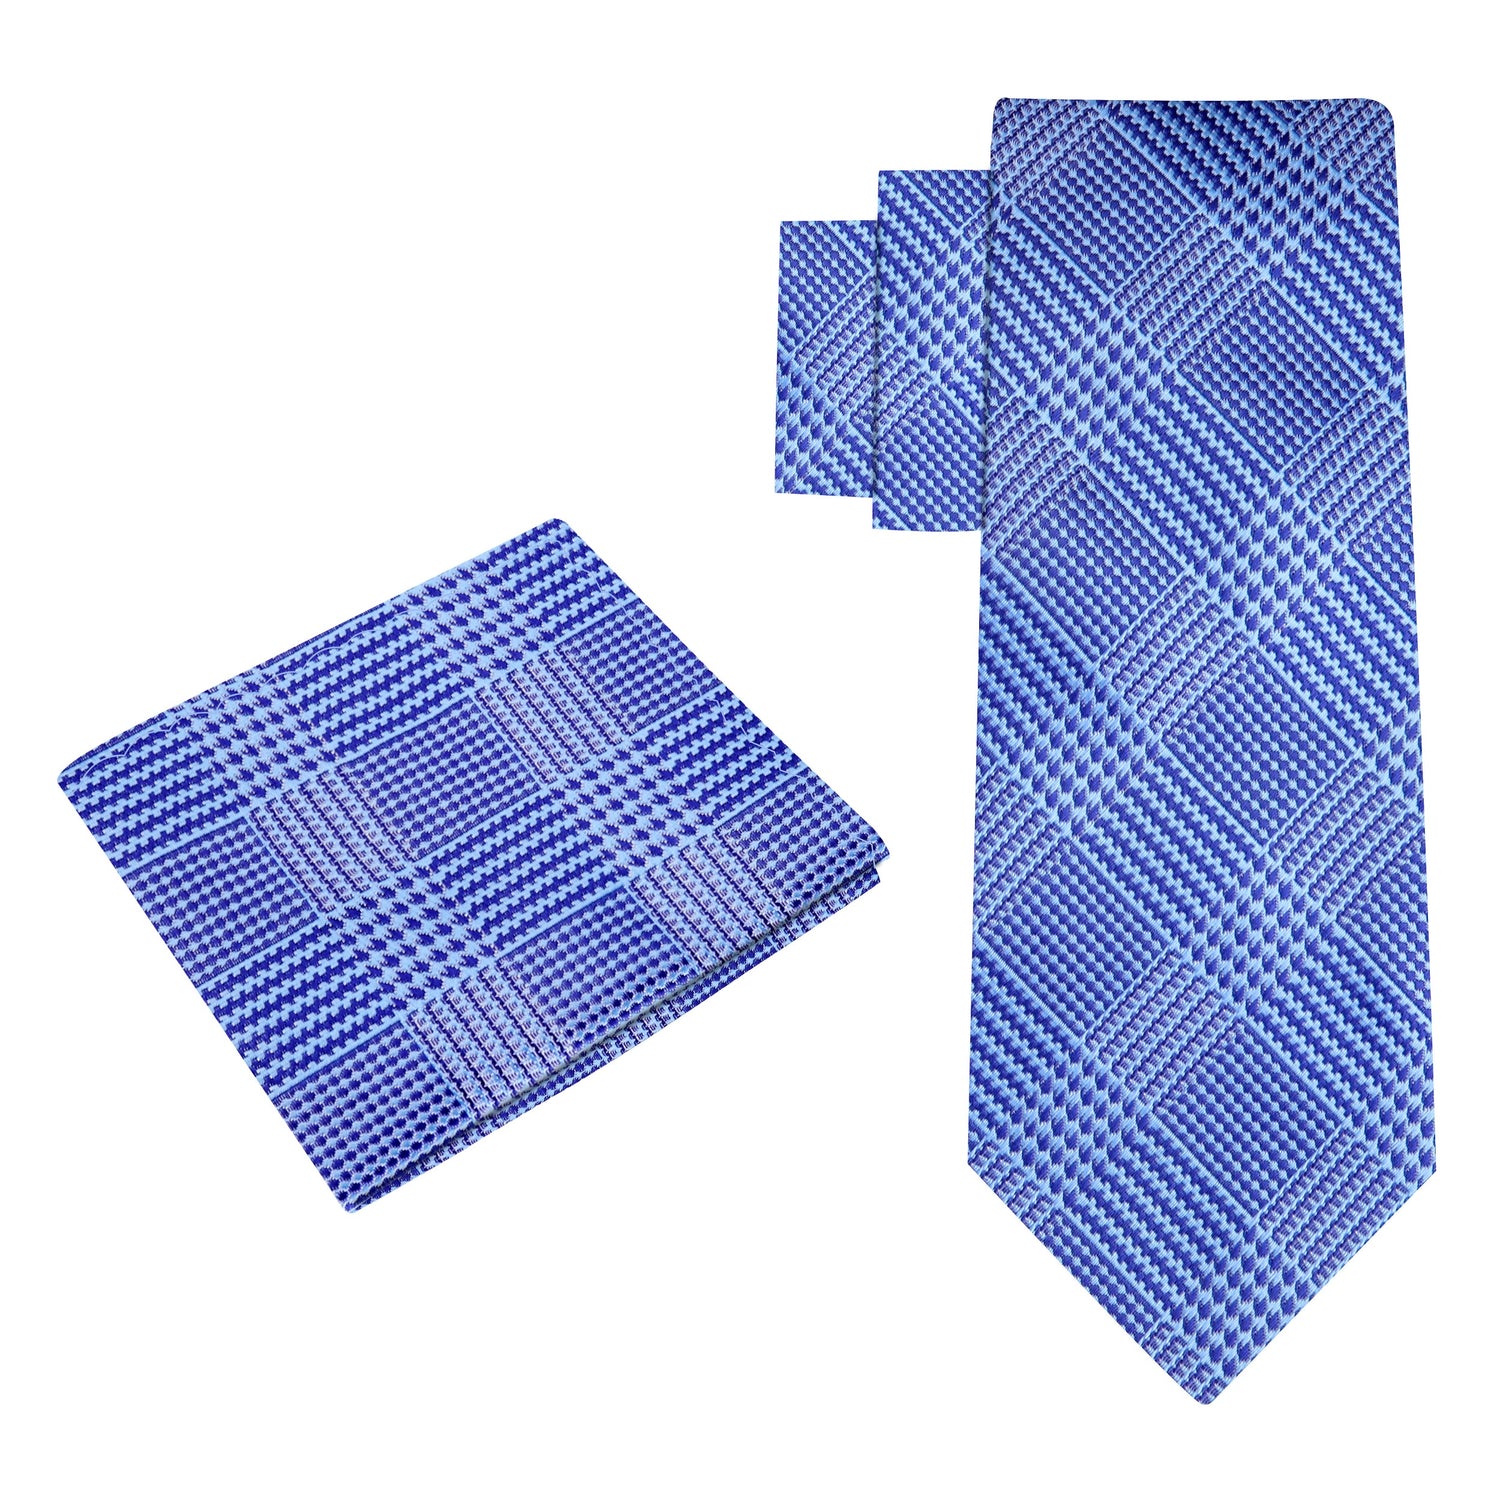 View 2: Light Blue Siberian Necktie and Square